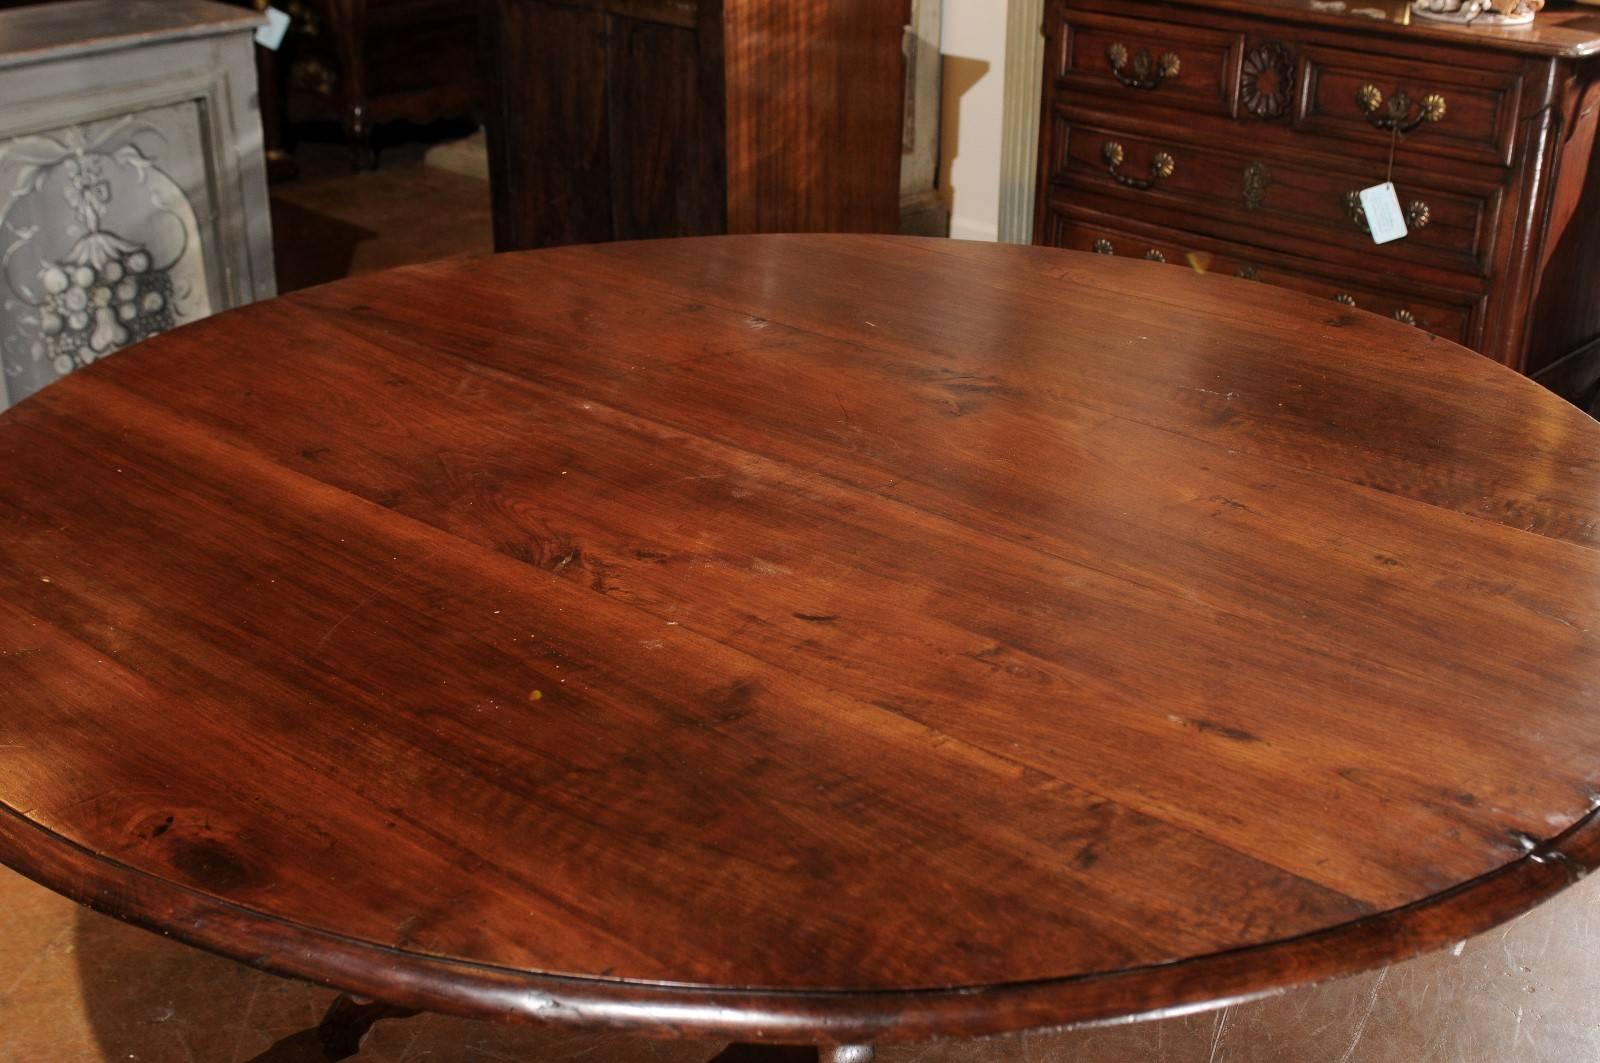 19th Century Italian Walnut Dining Table with Round Top and Pedestal Base, circa 1880